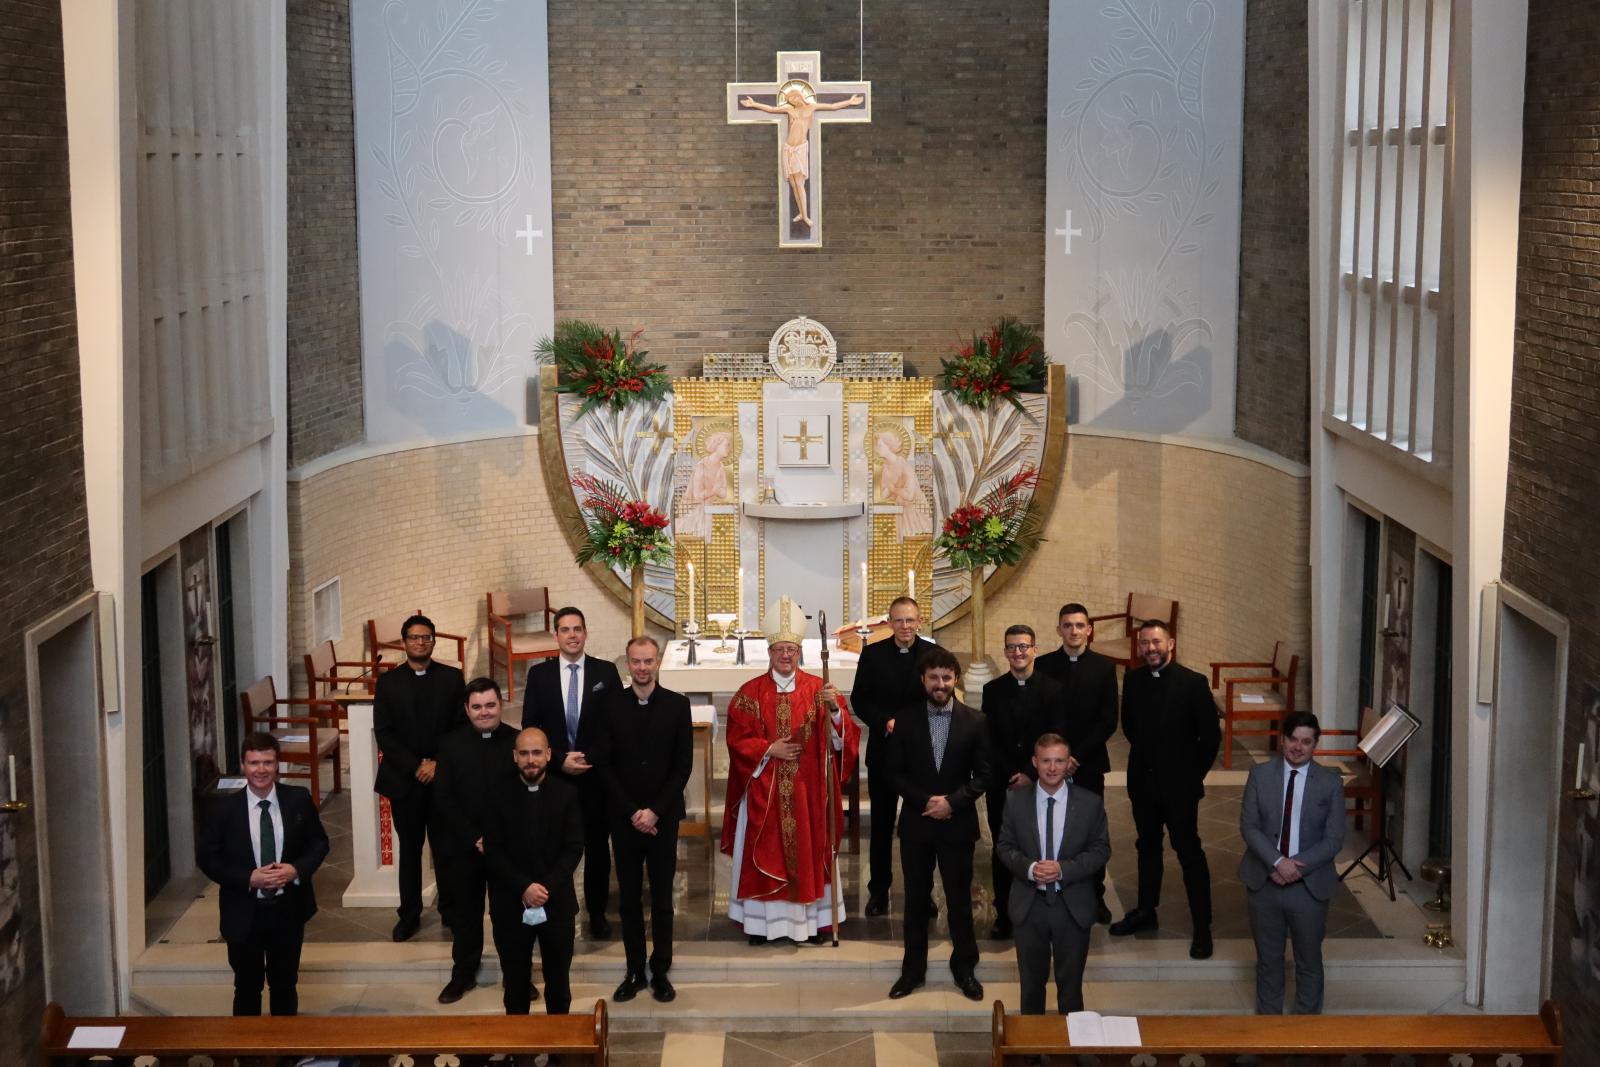 Seminarians receive ministries of Lector, Acolyte and admission to Candidacy in joint celebration - Diocese of Westminster